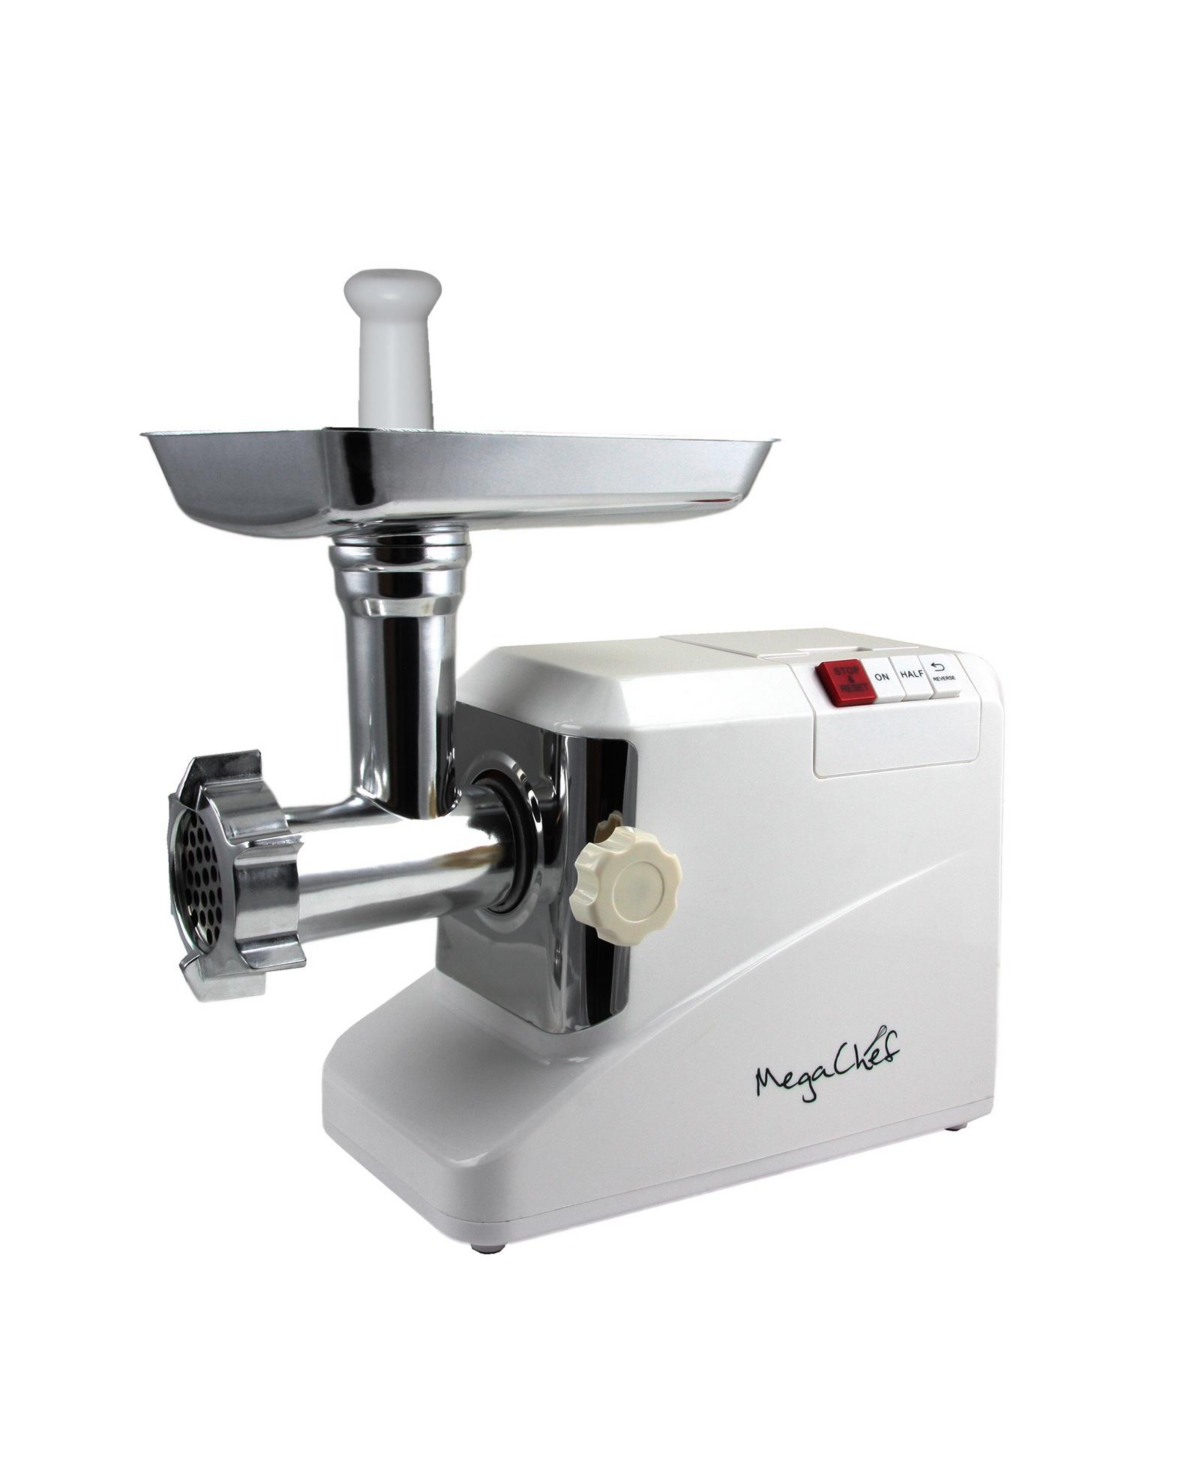 MEGACHEF 1800 WATT HIGH QUALITY AUTOMATIC MEAT GRINDER FOR HOUSEHOLD USE